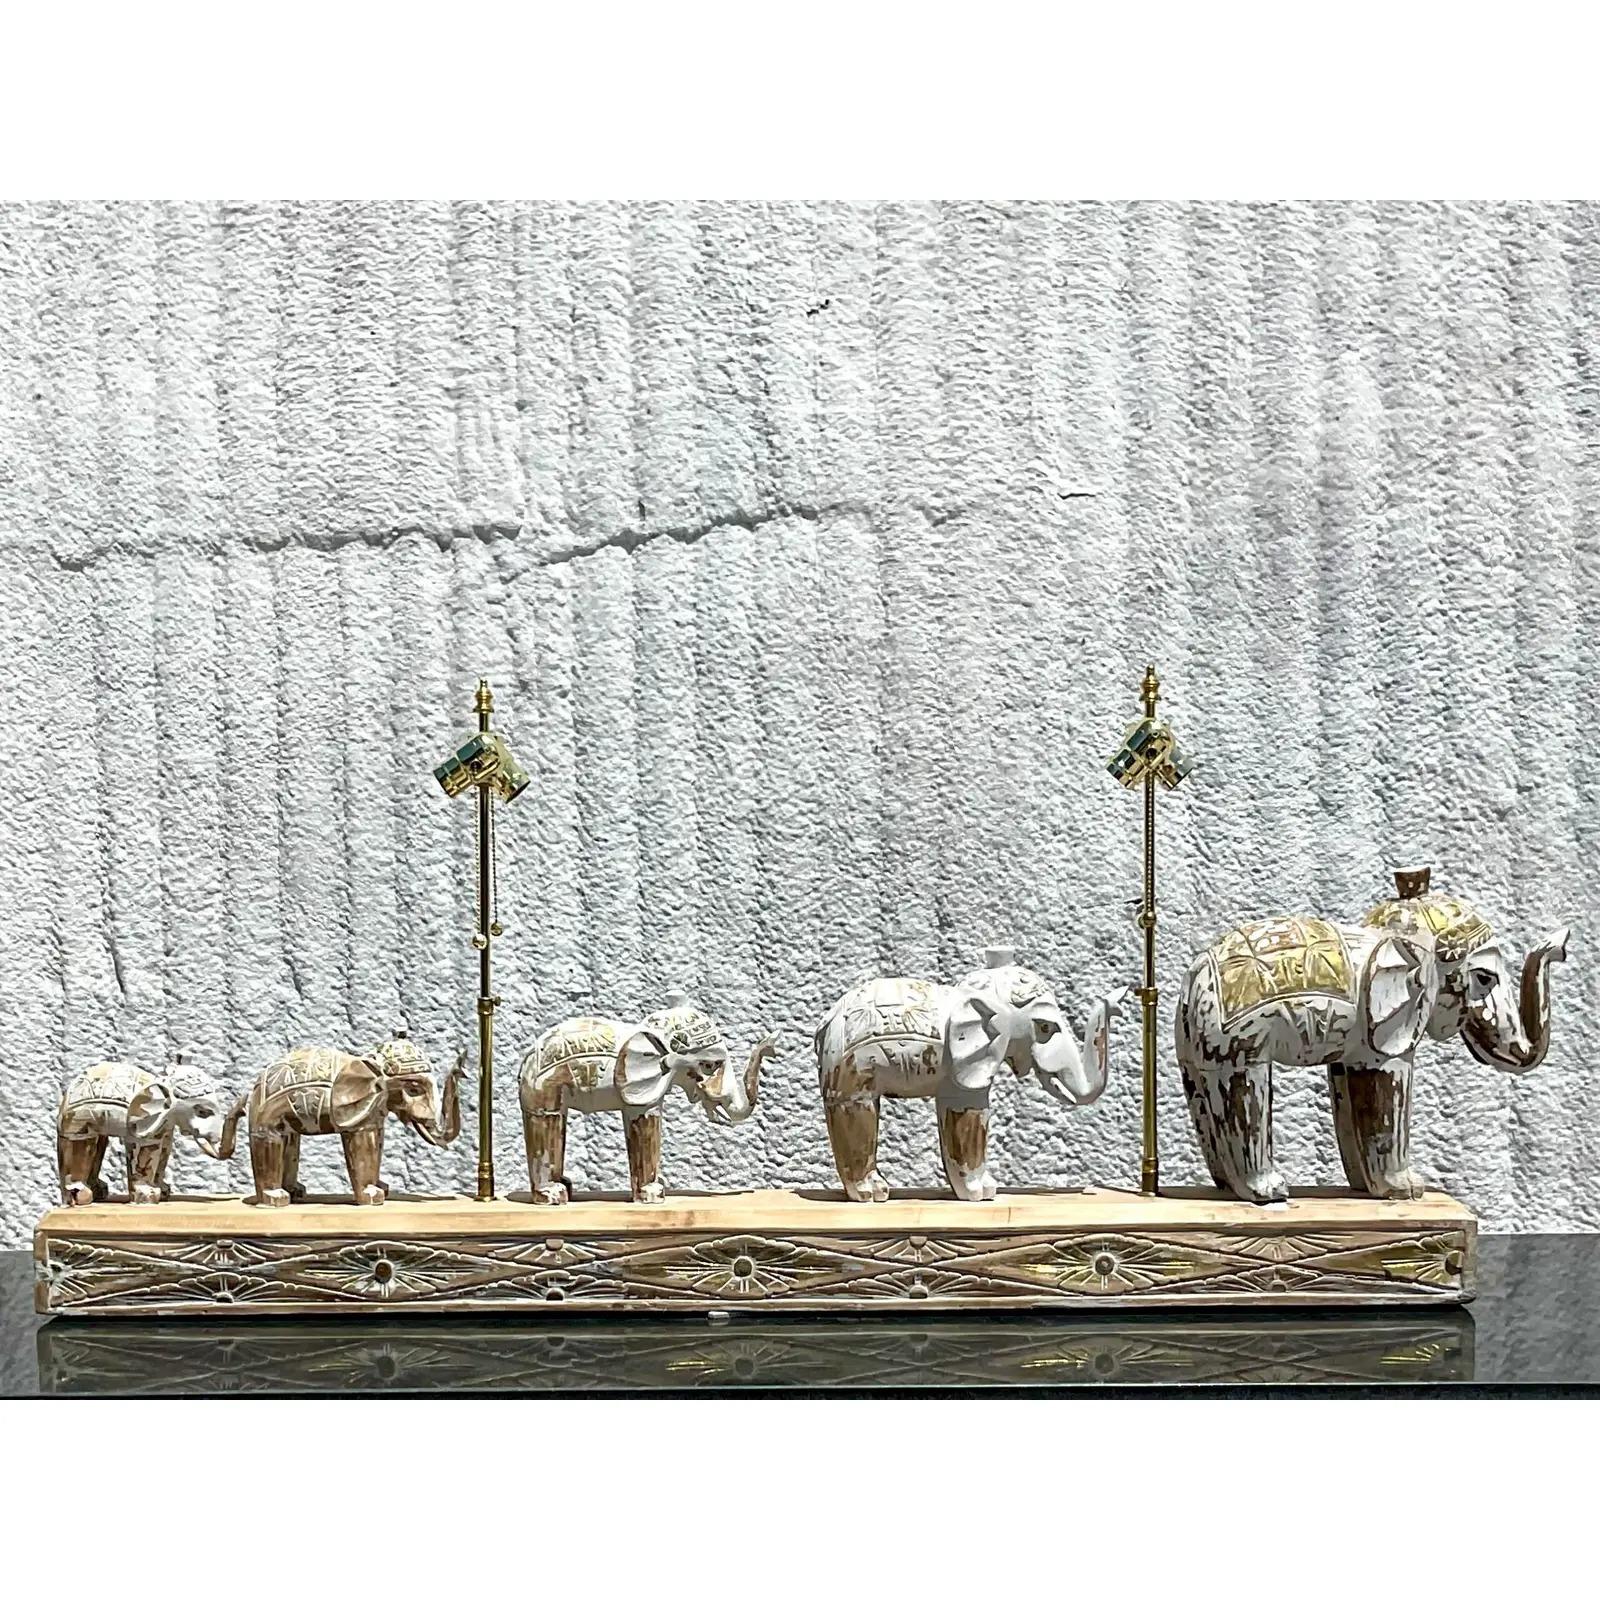 Fantastic vintage Coastal long lamp. Beautiful hand carved cerused wood with a chic parade of elephants. Each elephant has a touch of a gilt flash. Perfect for a long credenza or entry console. Imagine with some vintage printed shades or vintage